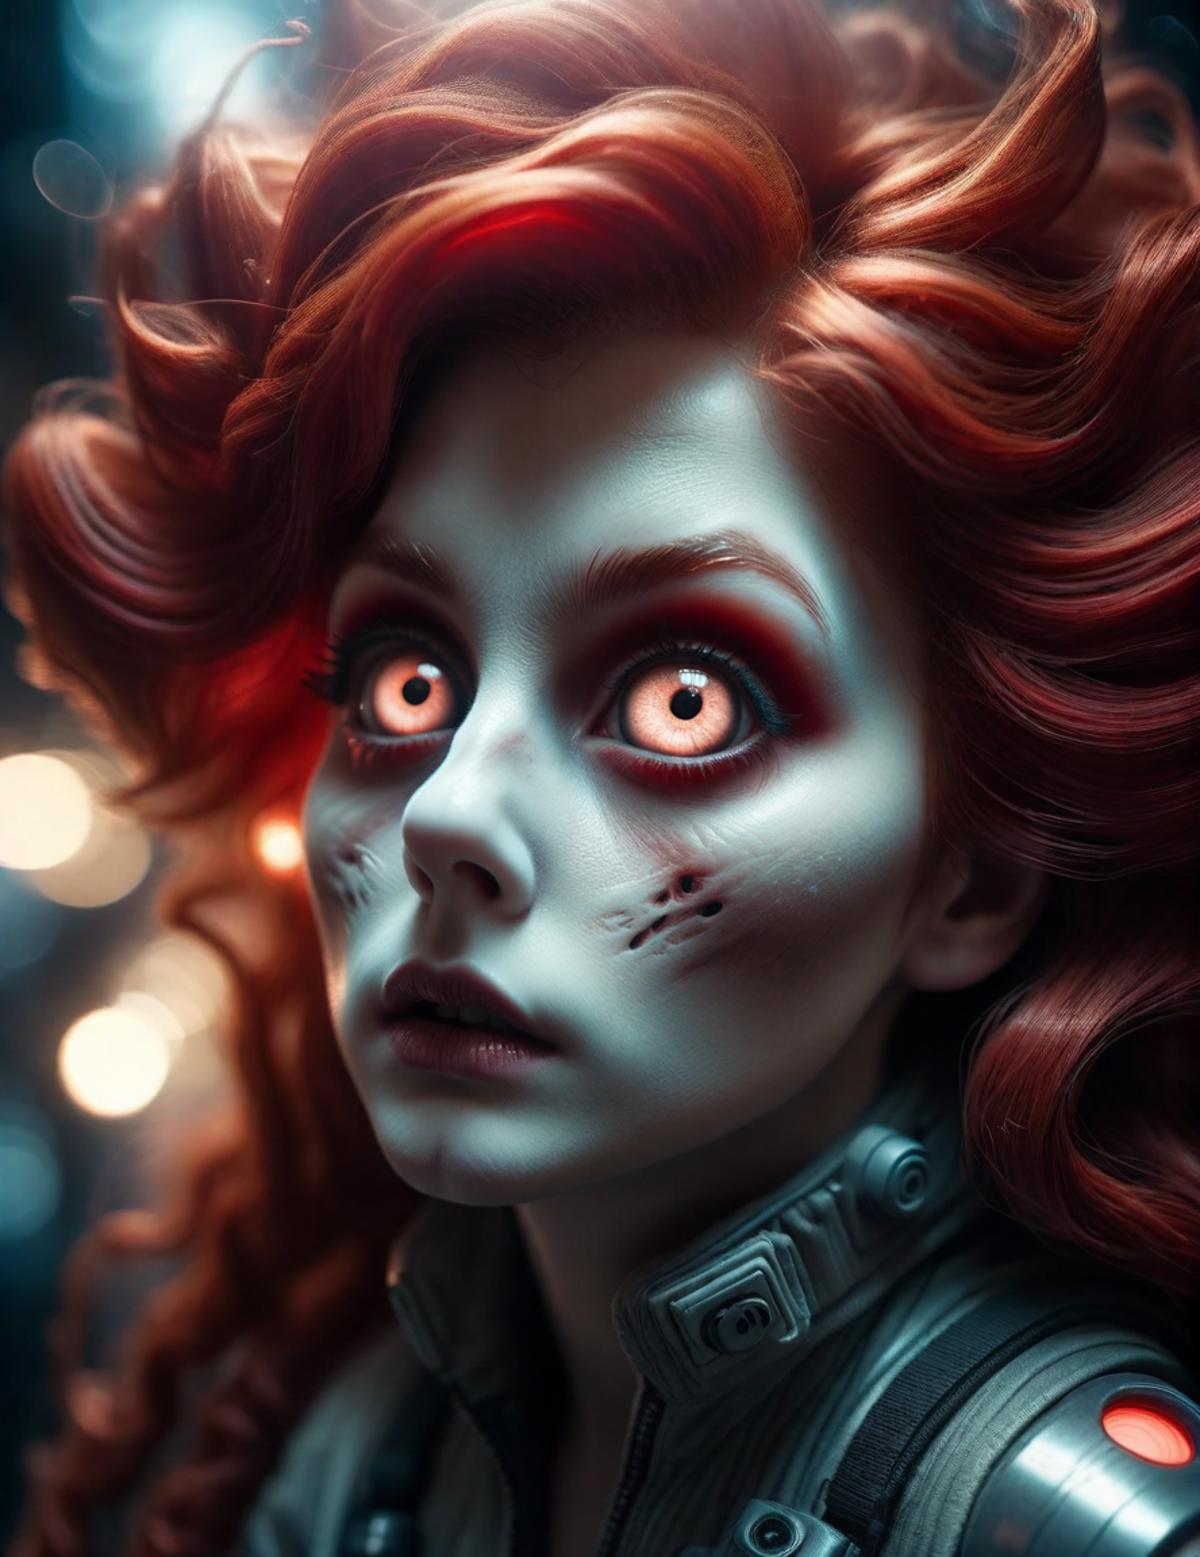 A woman with red hair and scary eyes staring into the camera.